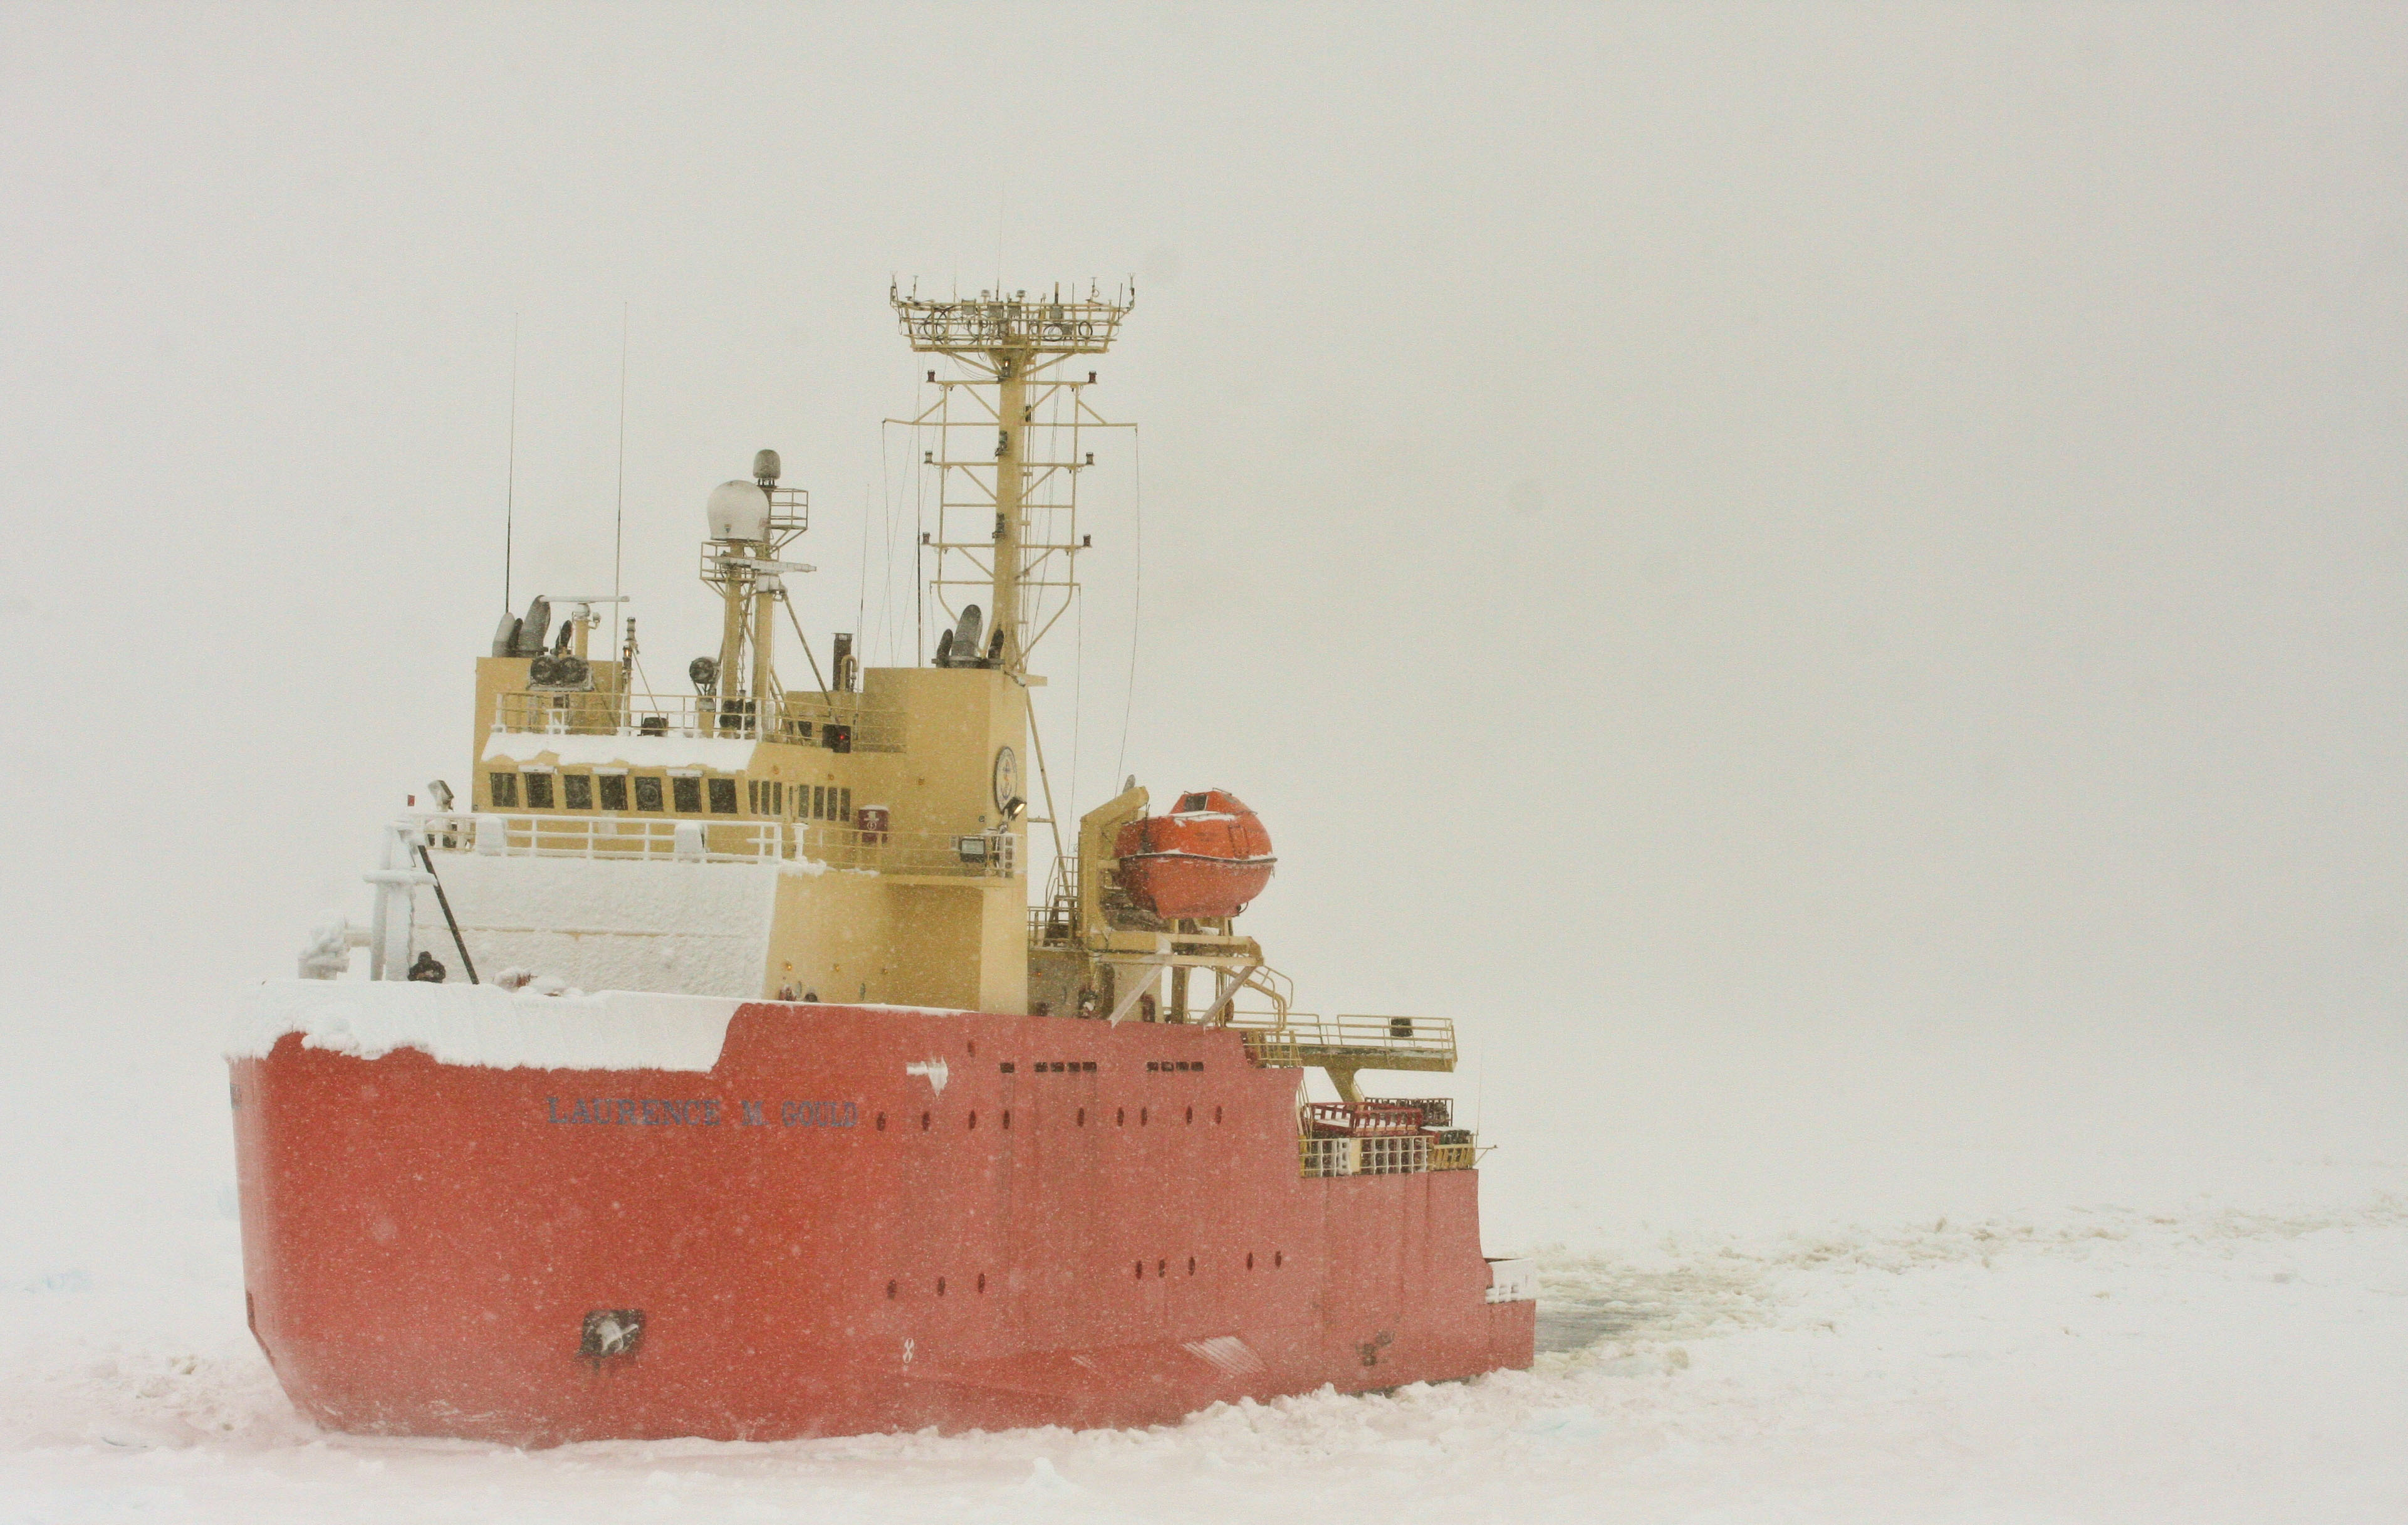 A ship in icy water.